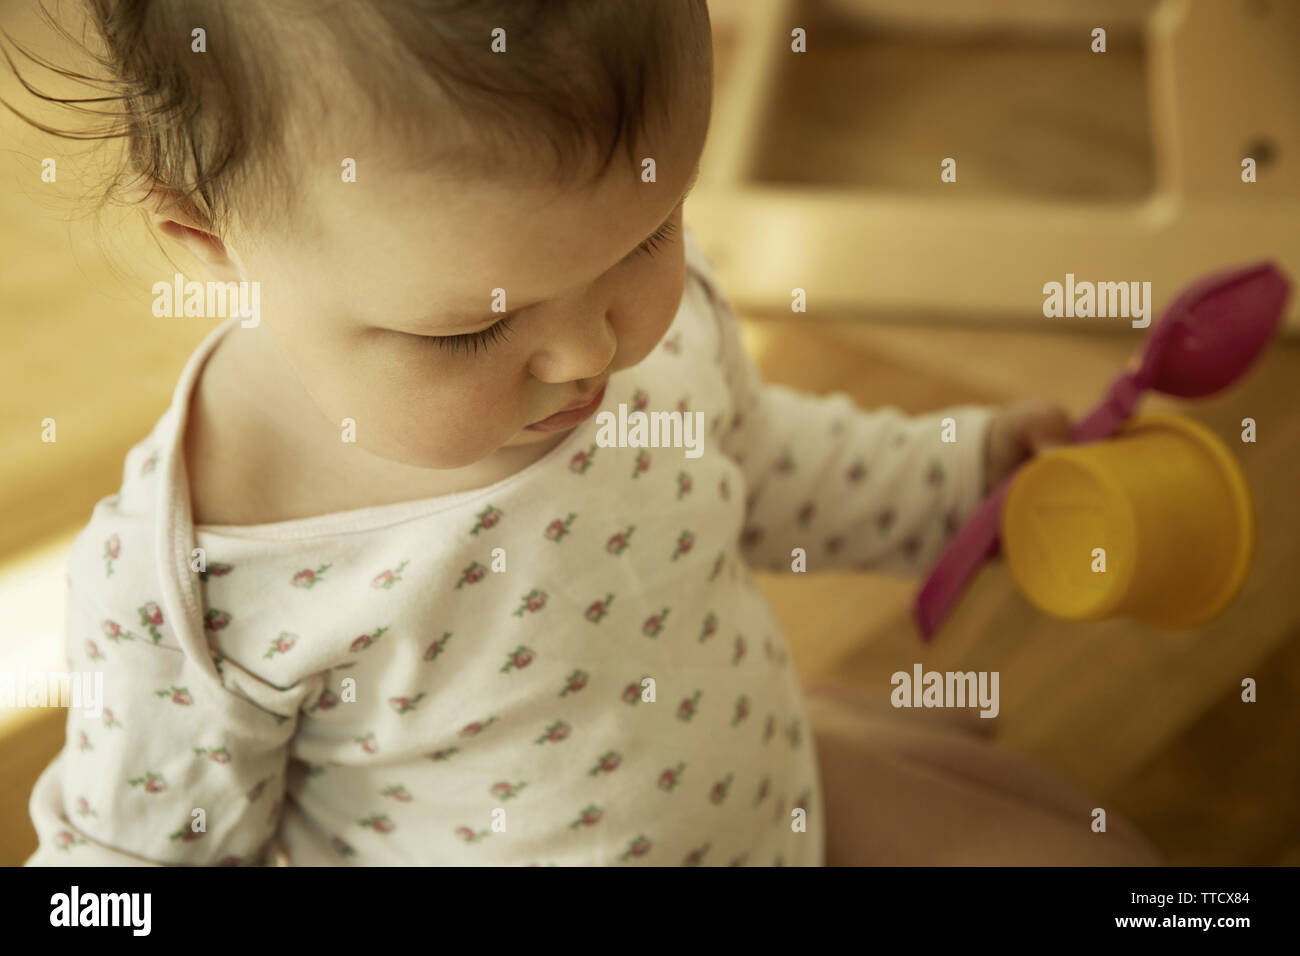 Cute little baby girl with toys Stock Photo